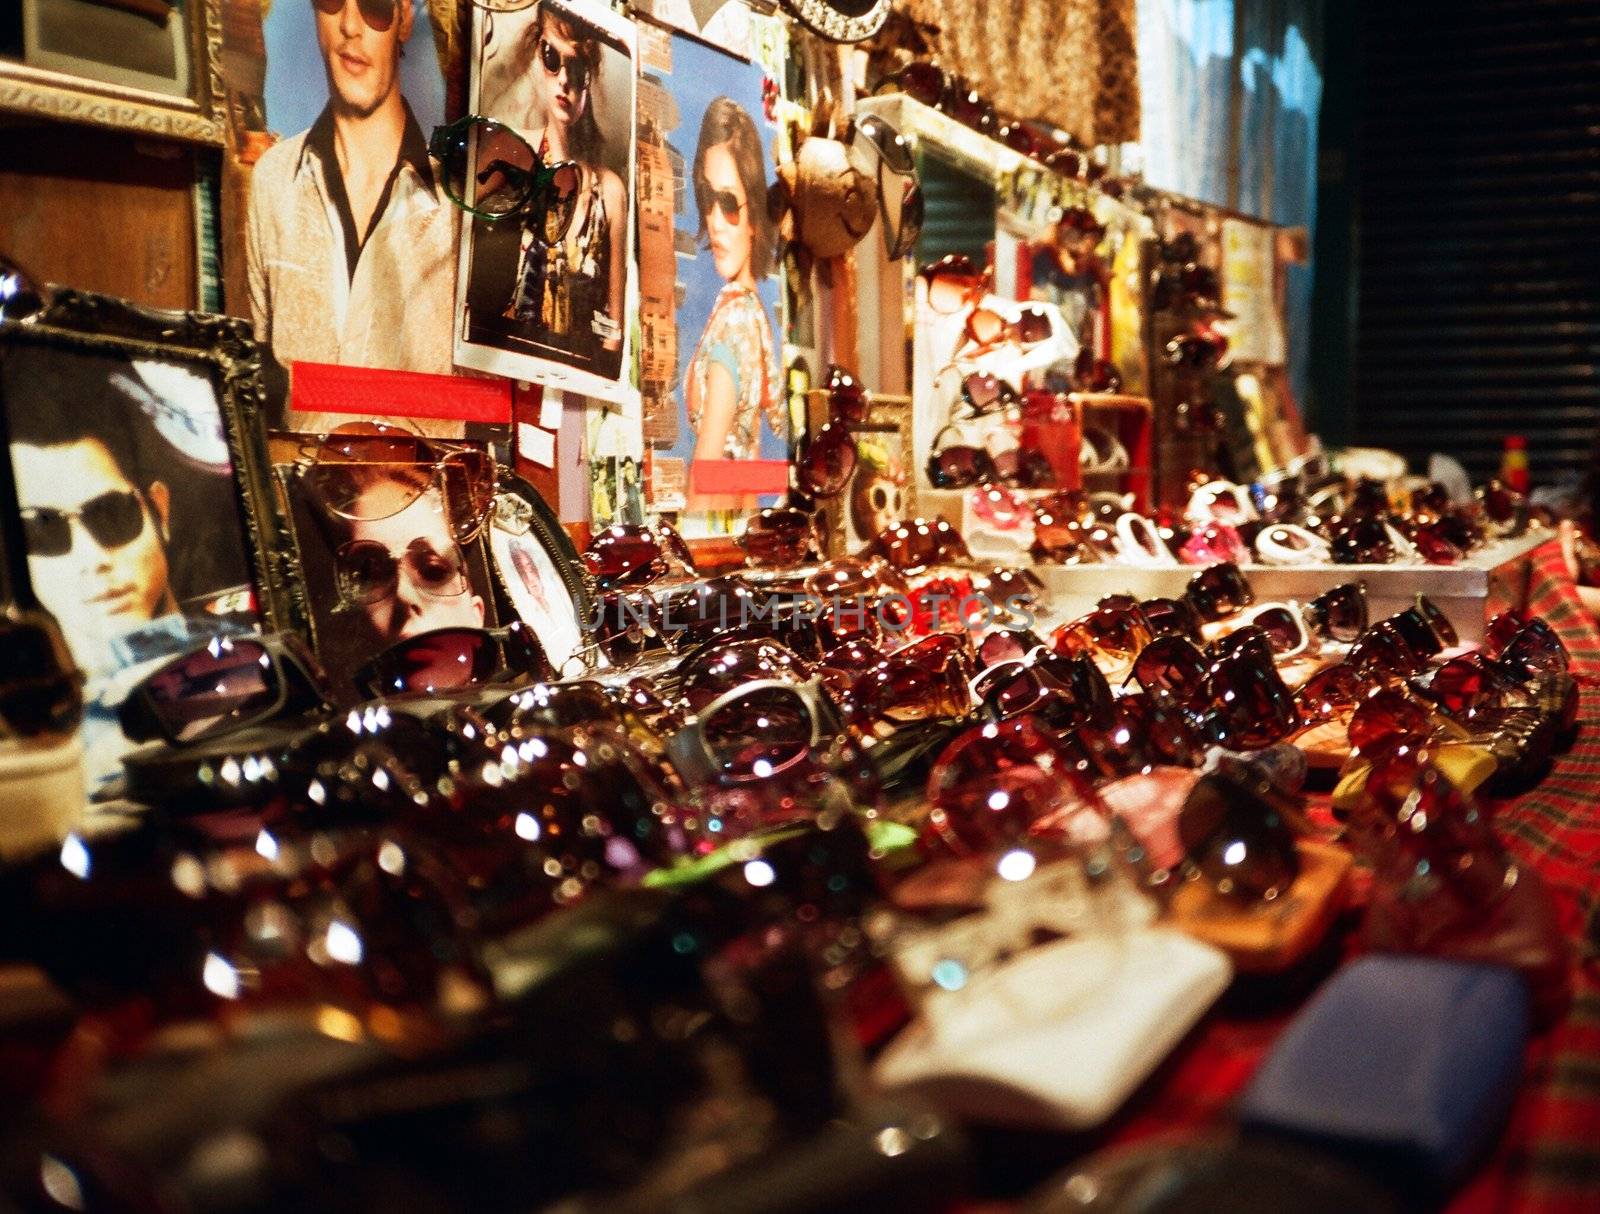 Many brands of sun-glasses can be found in night market, HongKong.